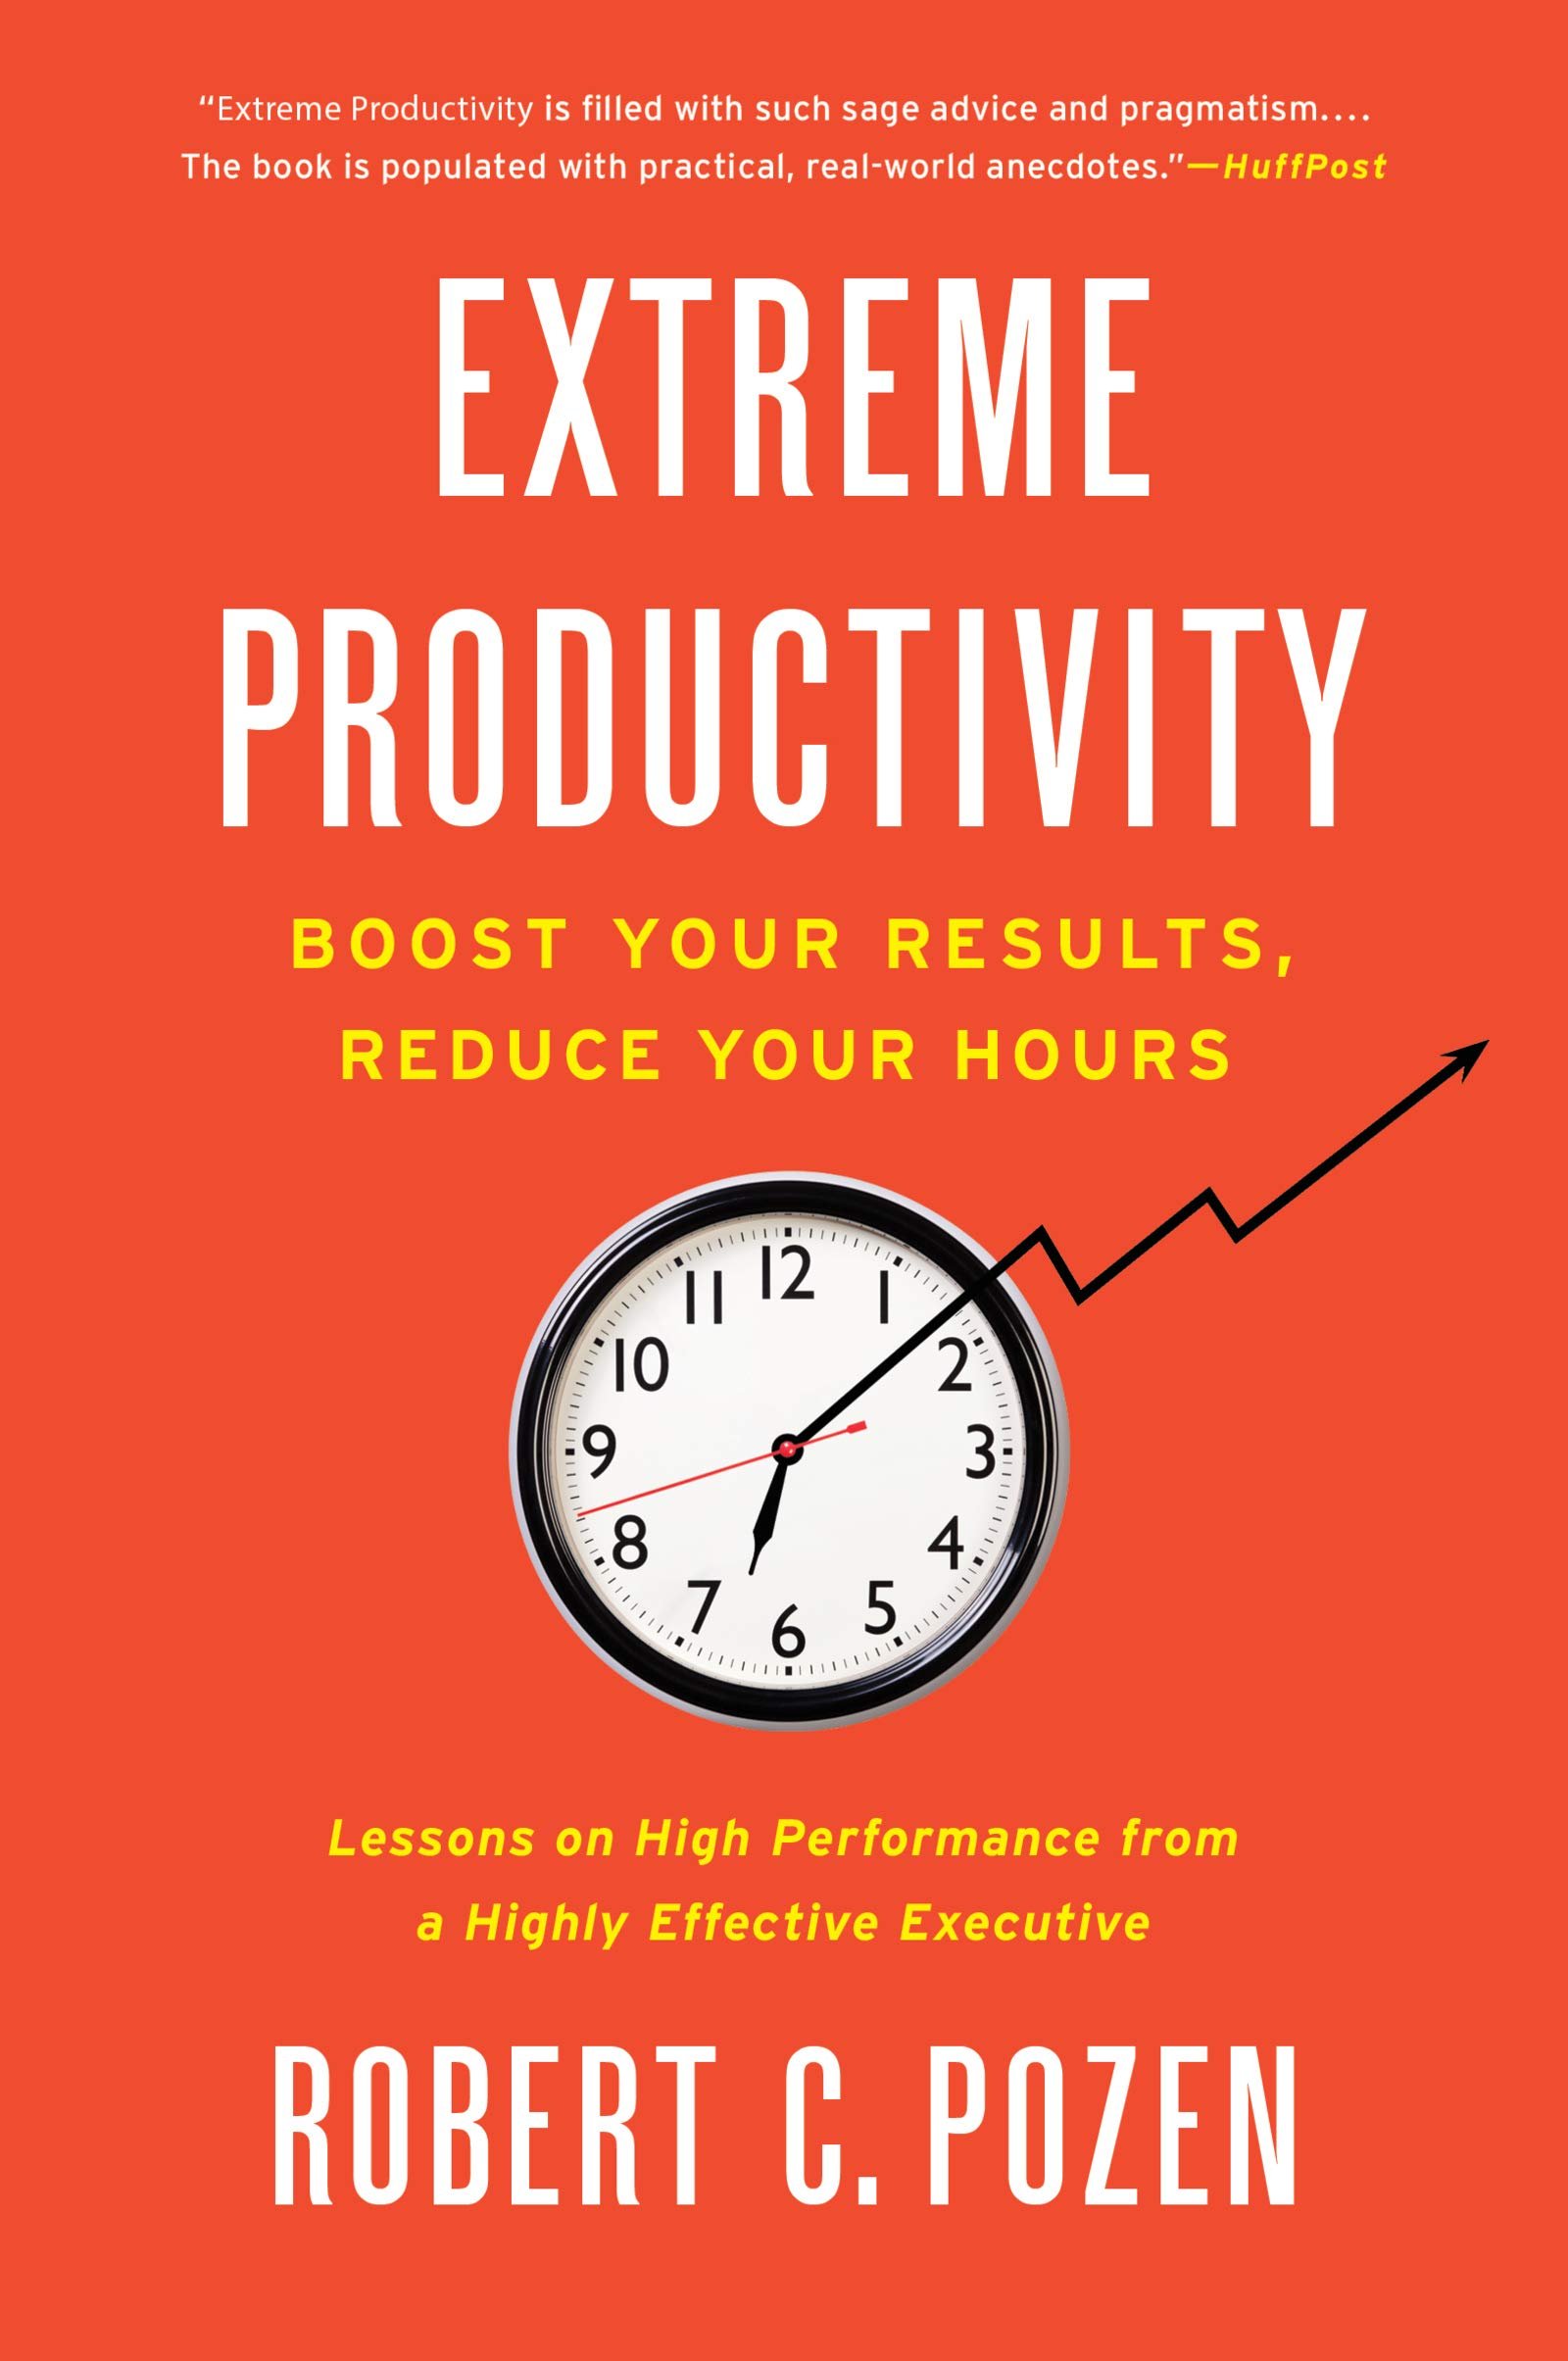 robert pozen extreme productivity boost your results, reduce your hours